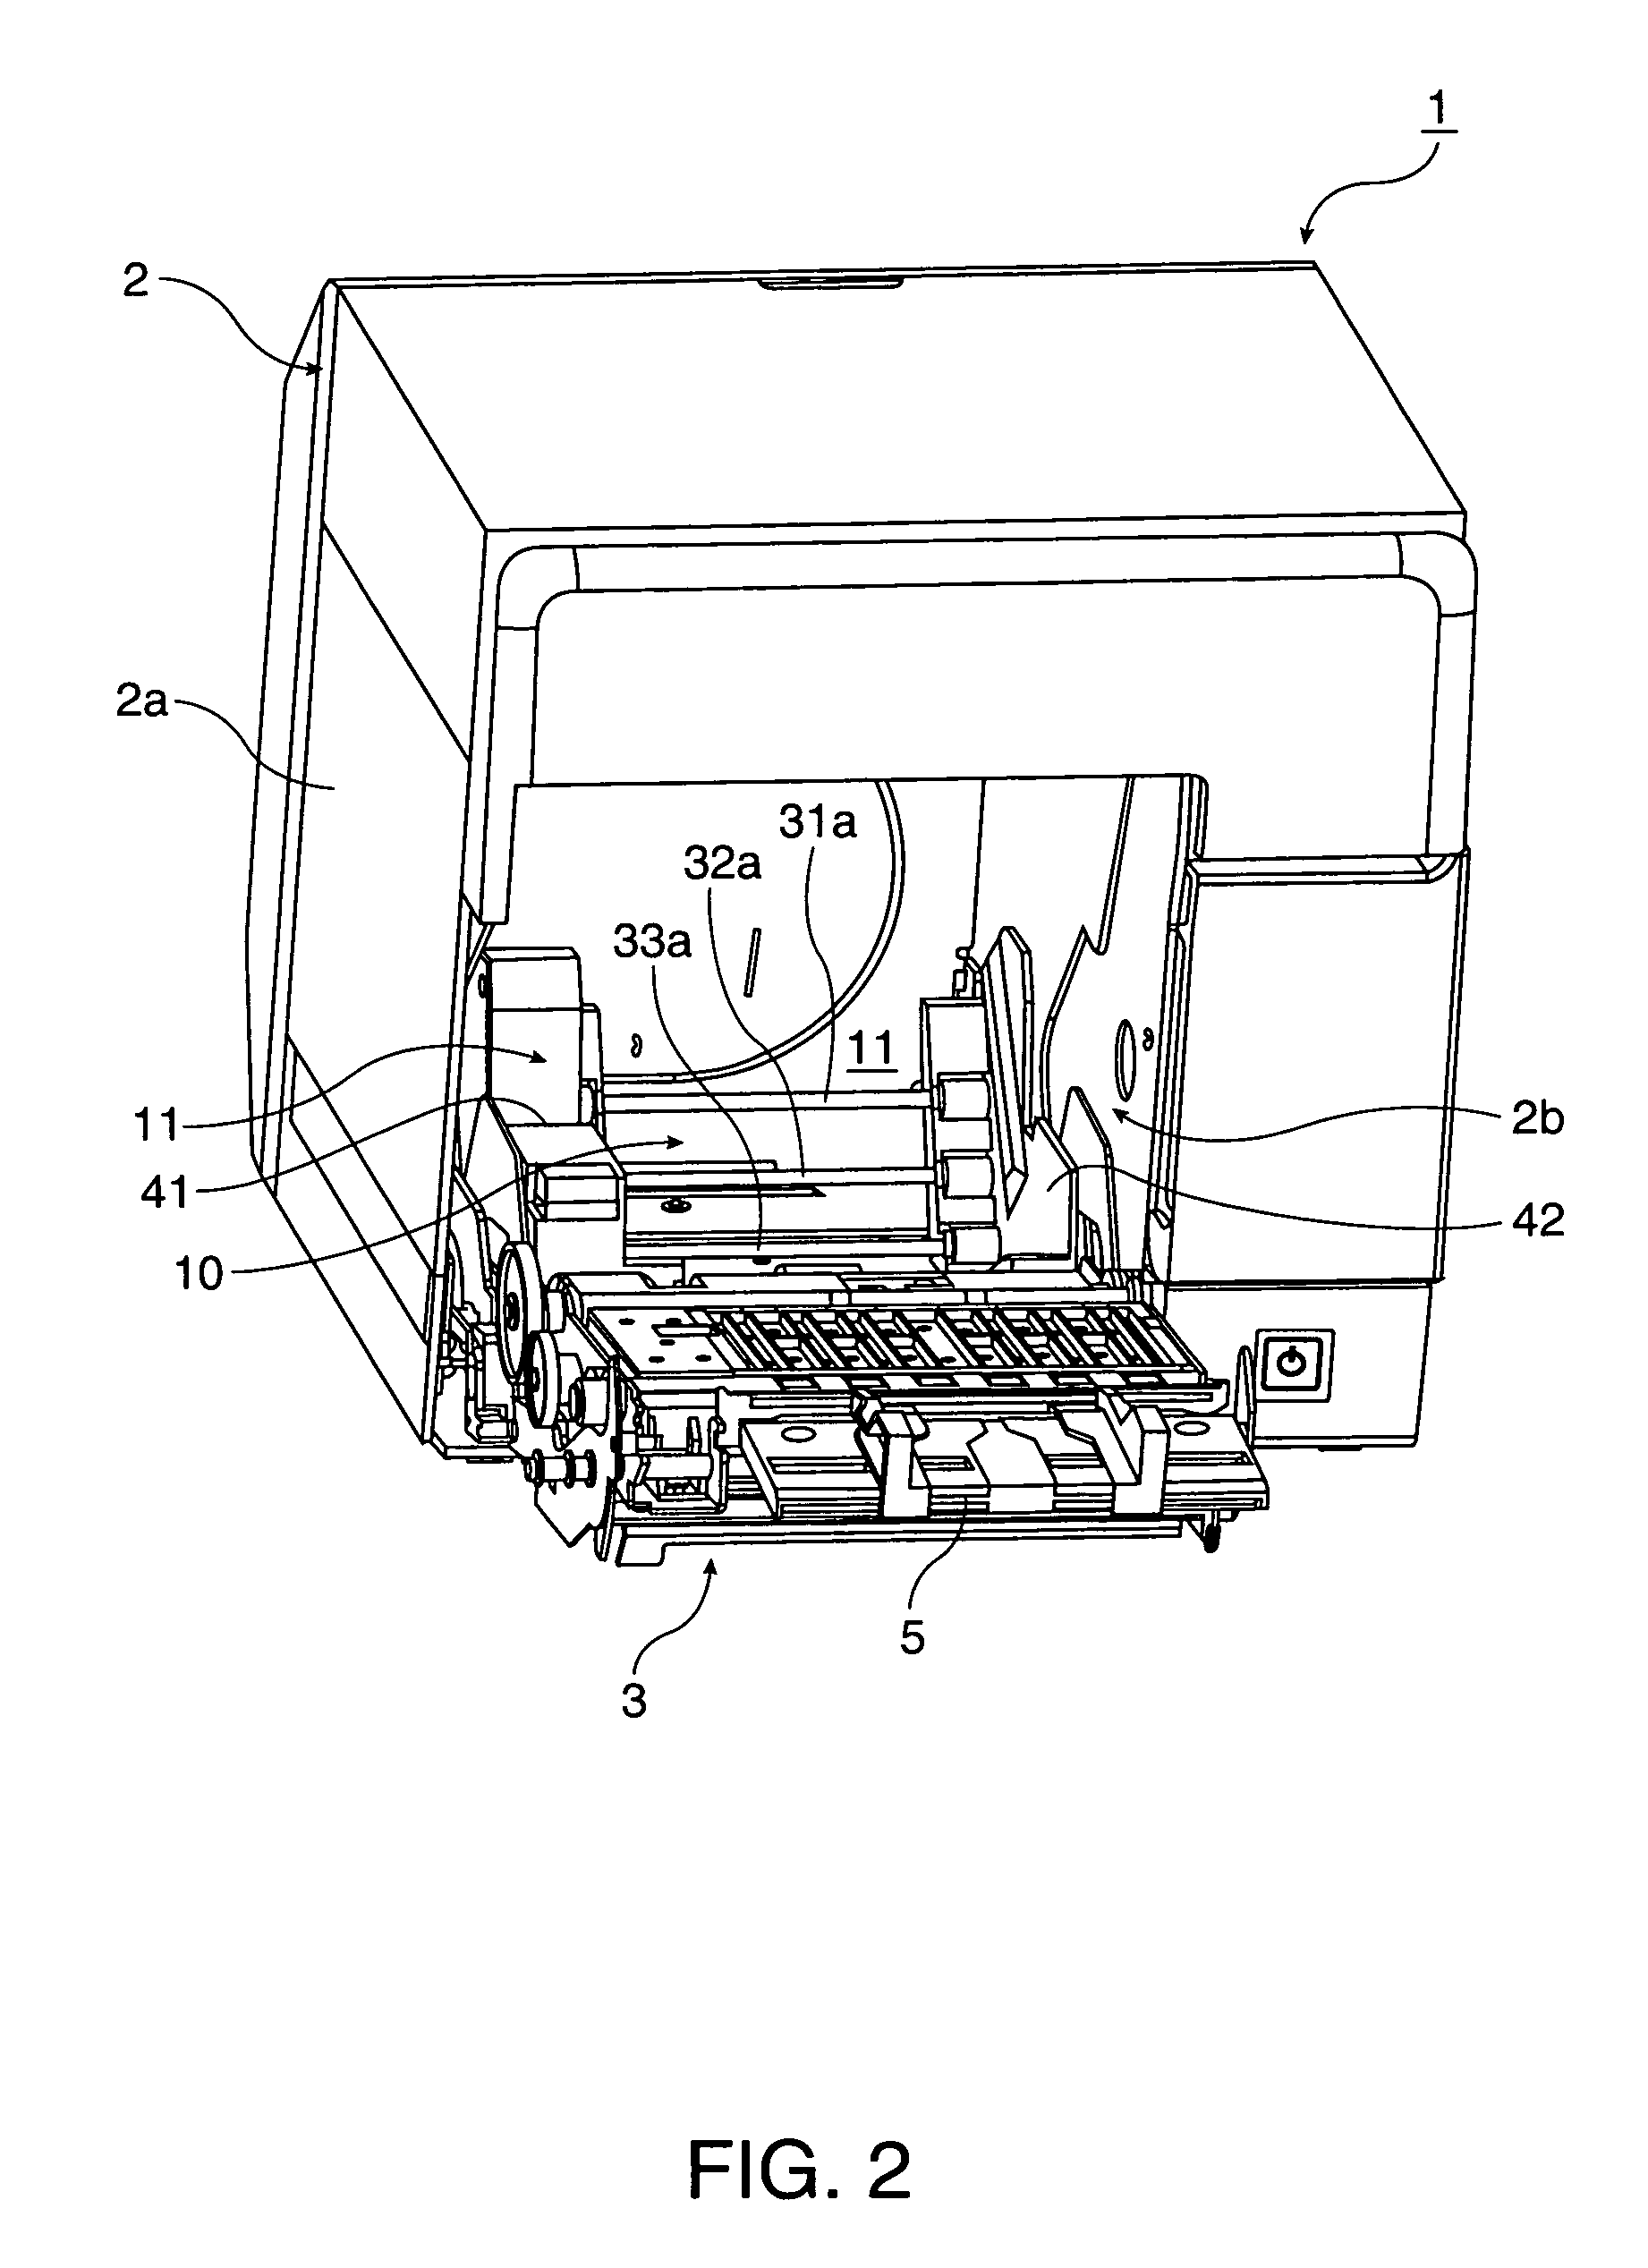 Paper supply mechanism and roll paper printer